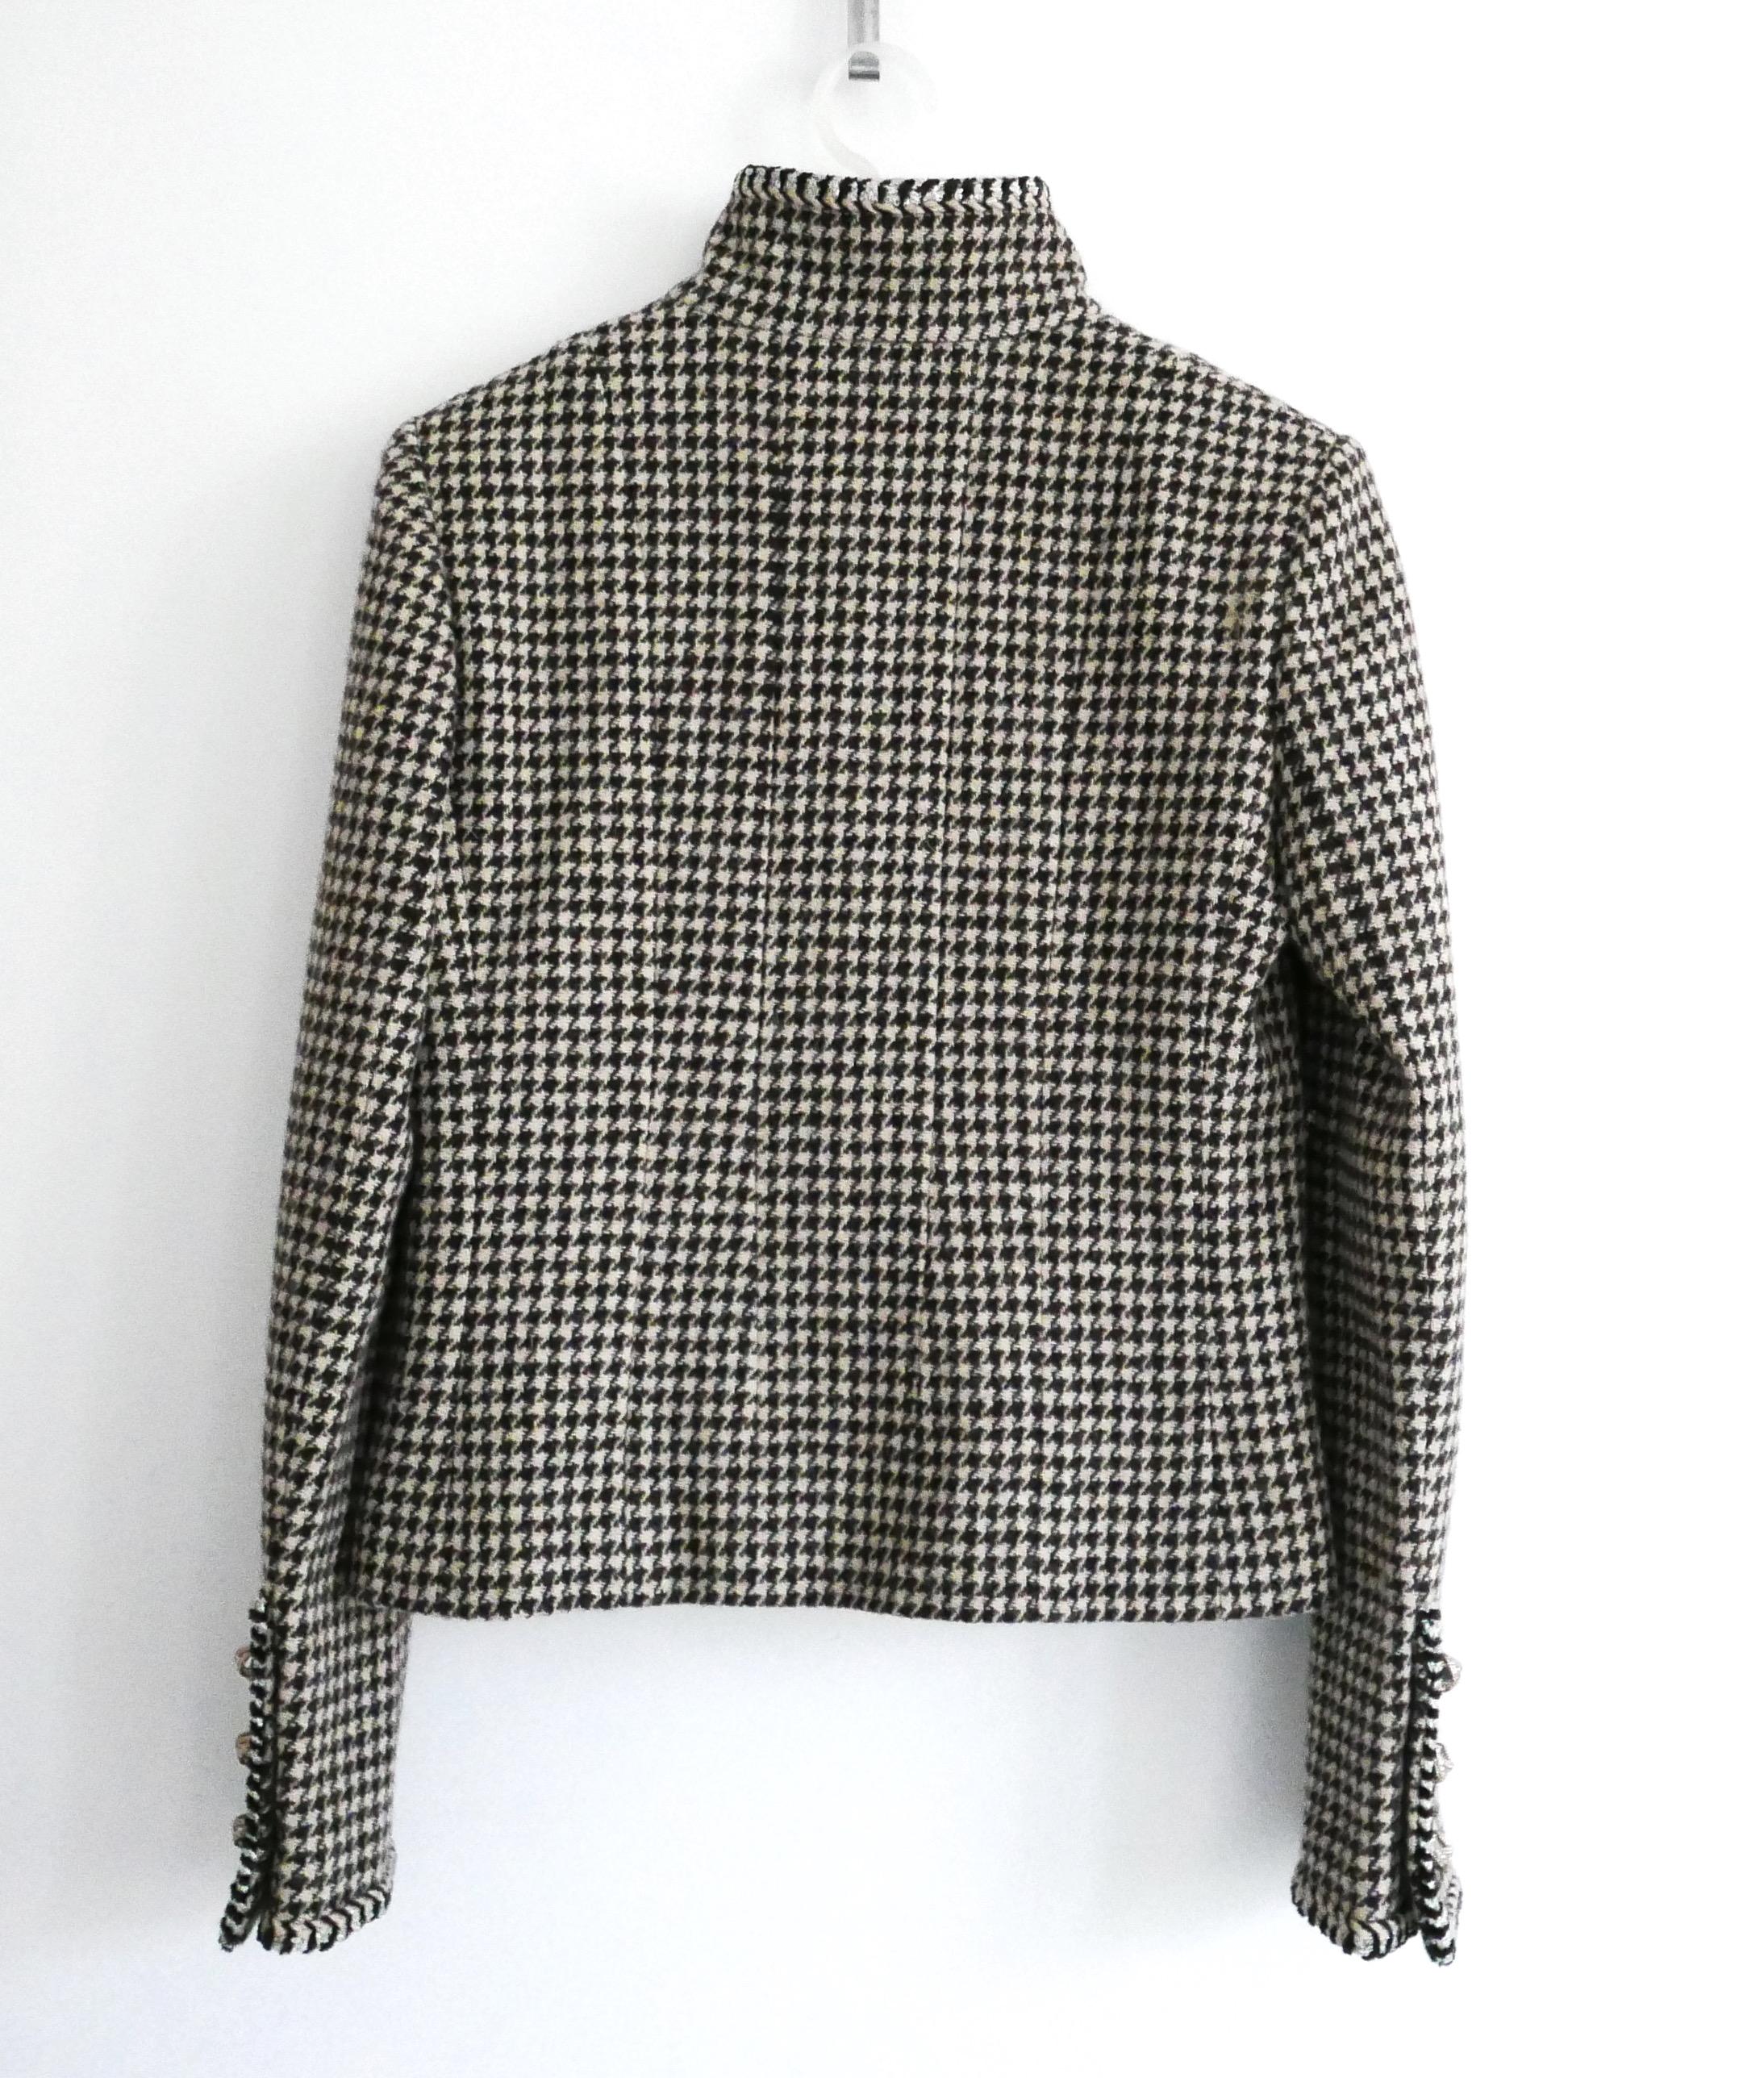 Women's Chanel Fall 2015 Houndstooth Fantasy Tweed Jacket  For Sale